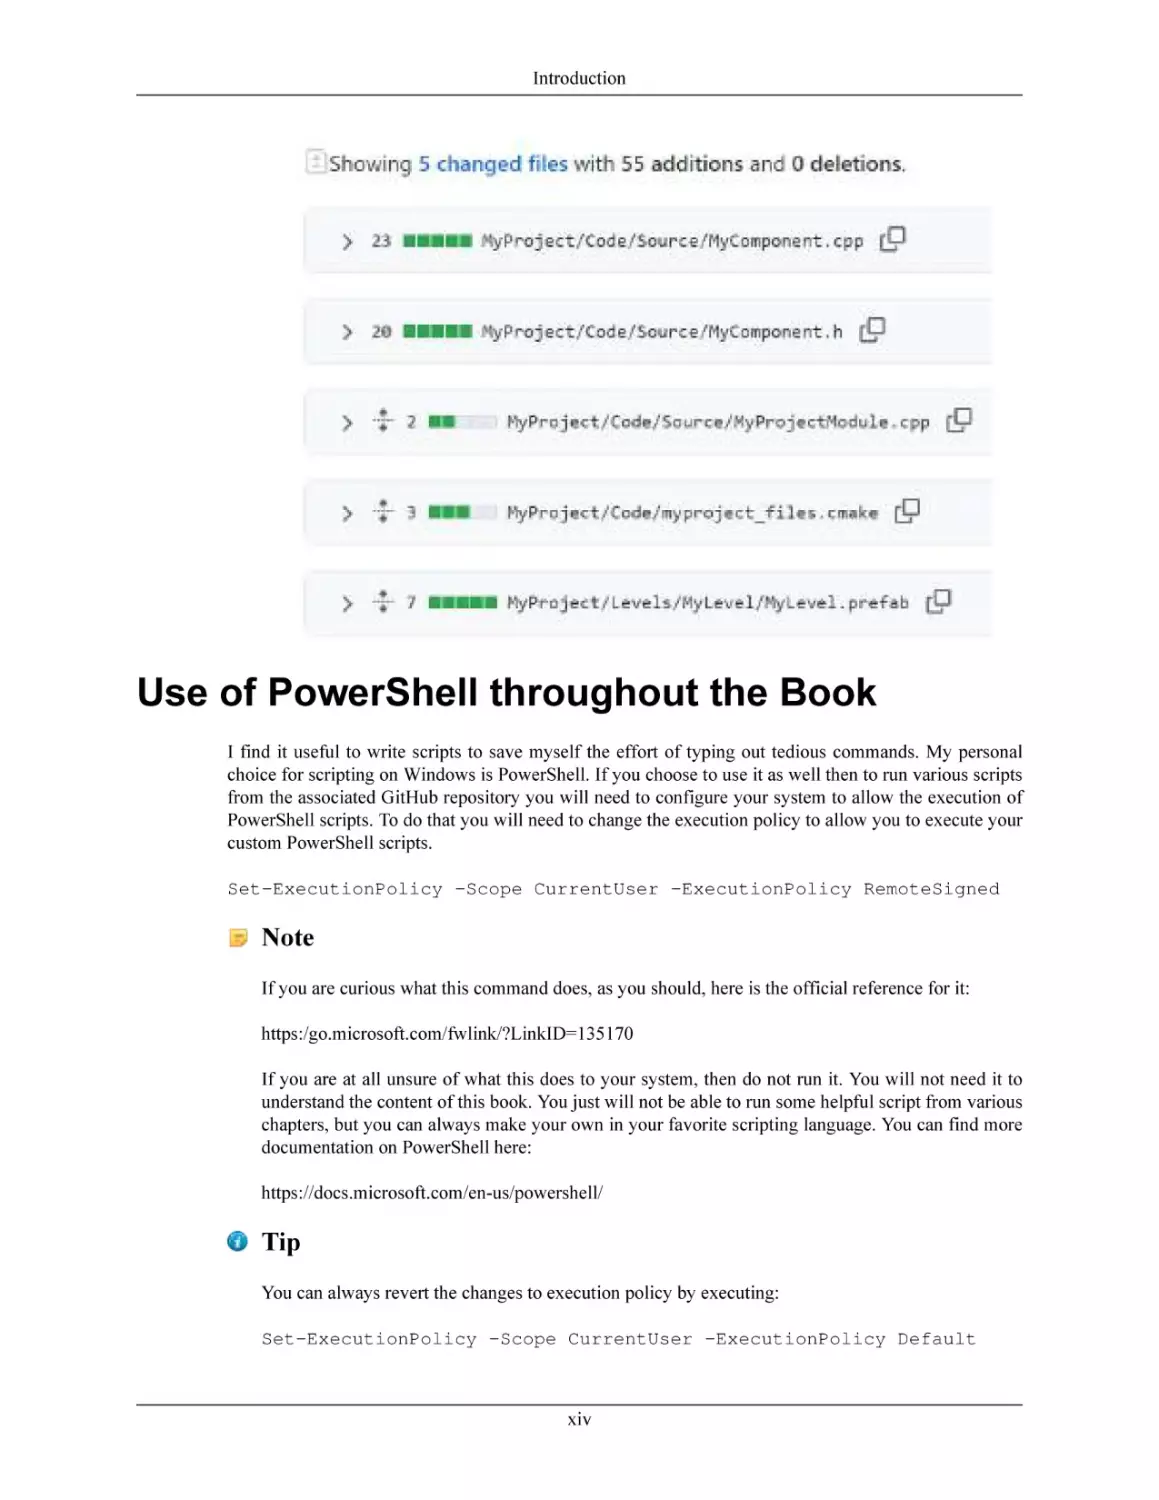 Use of PowerShell throughout the Book